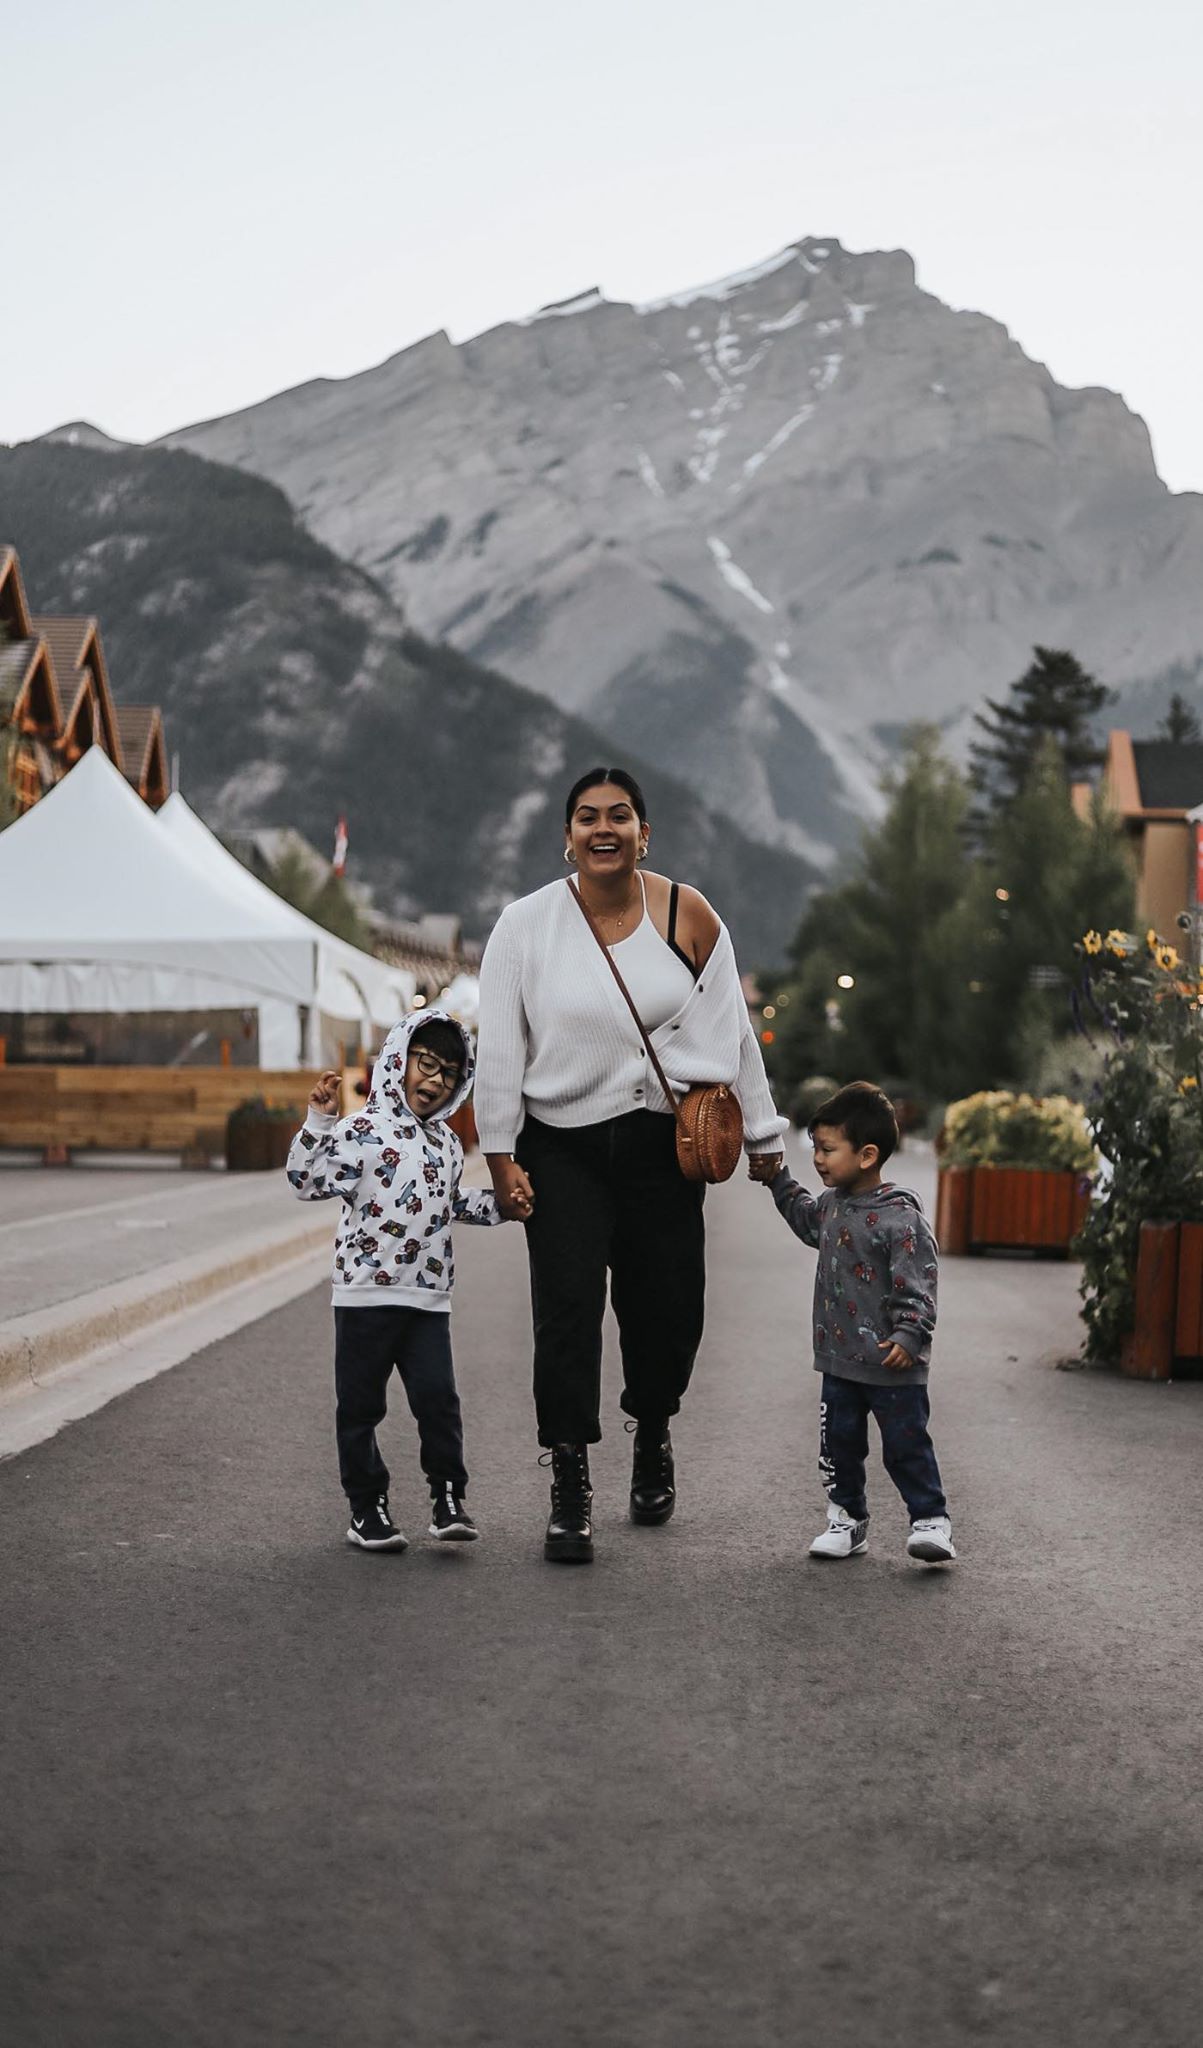 Banff Avenue, Traveling with kids to Banff